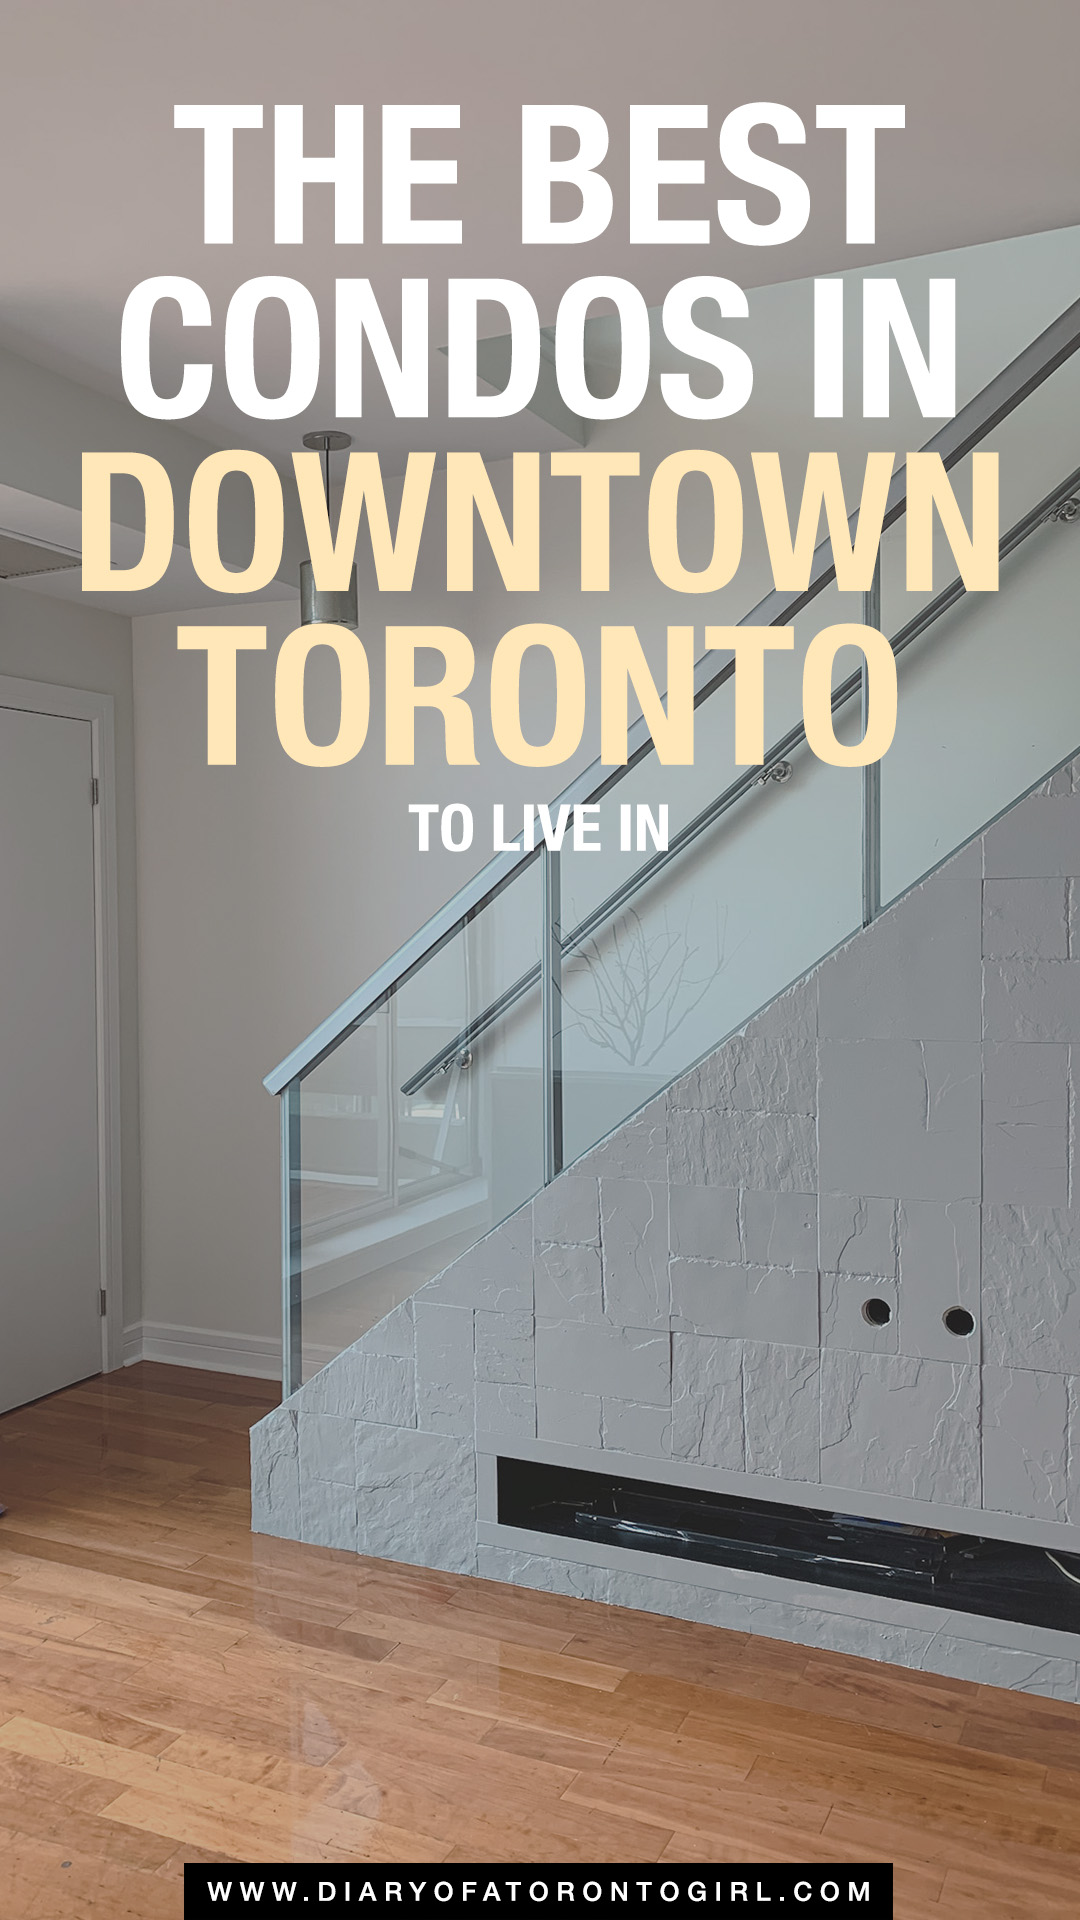 Best condos in downtown Toronto